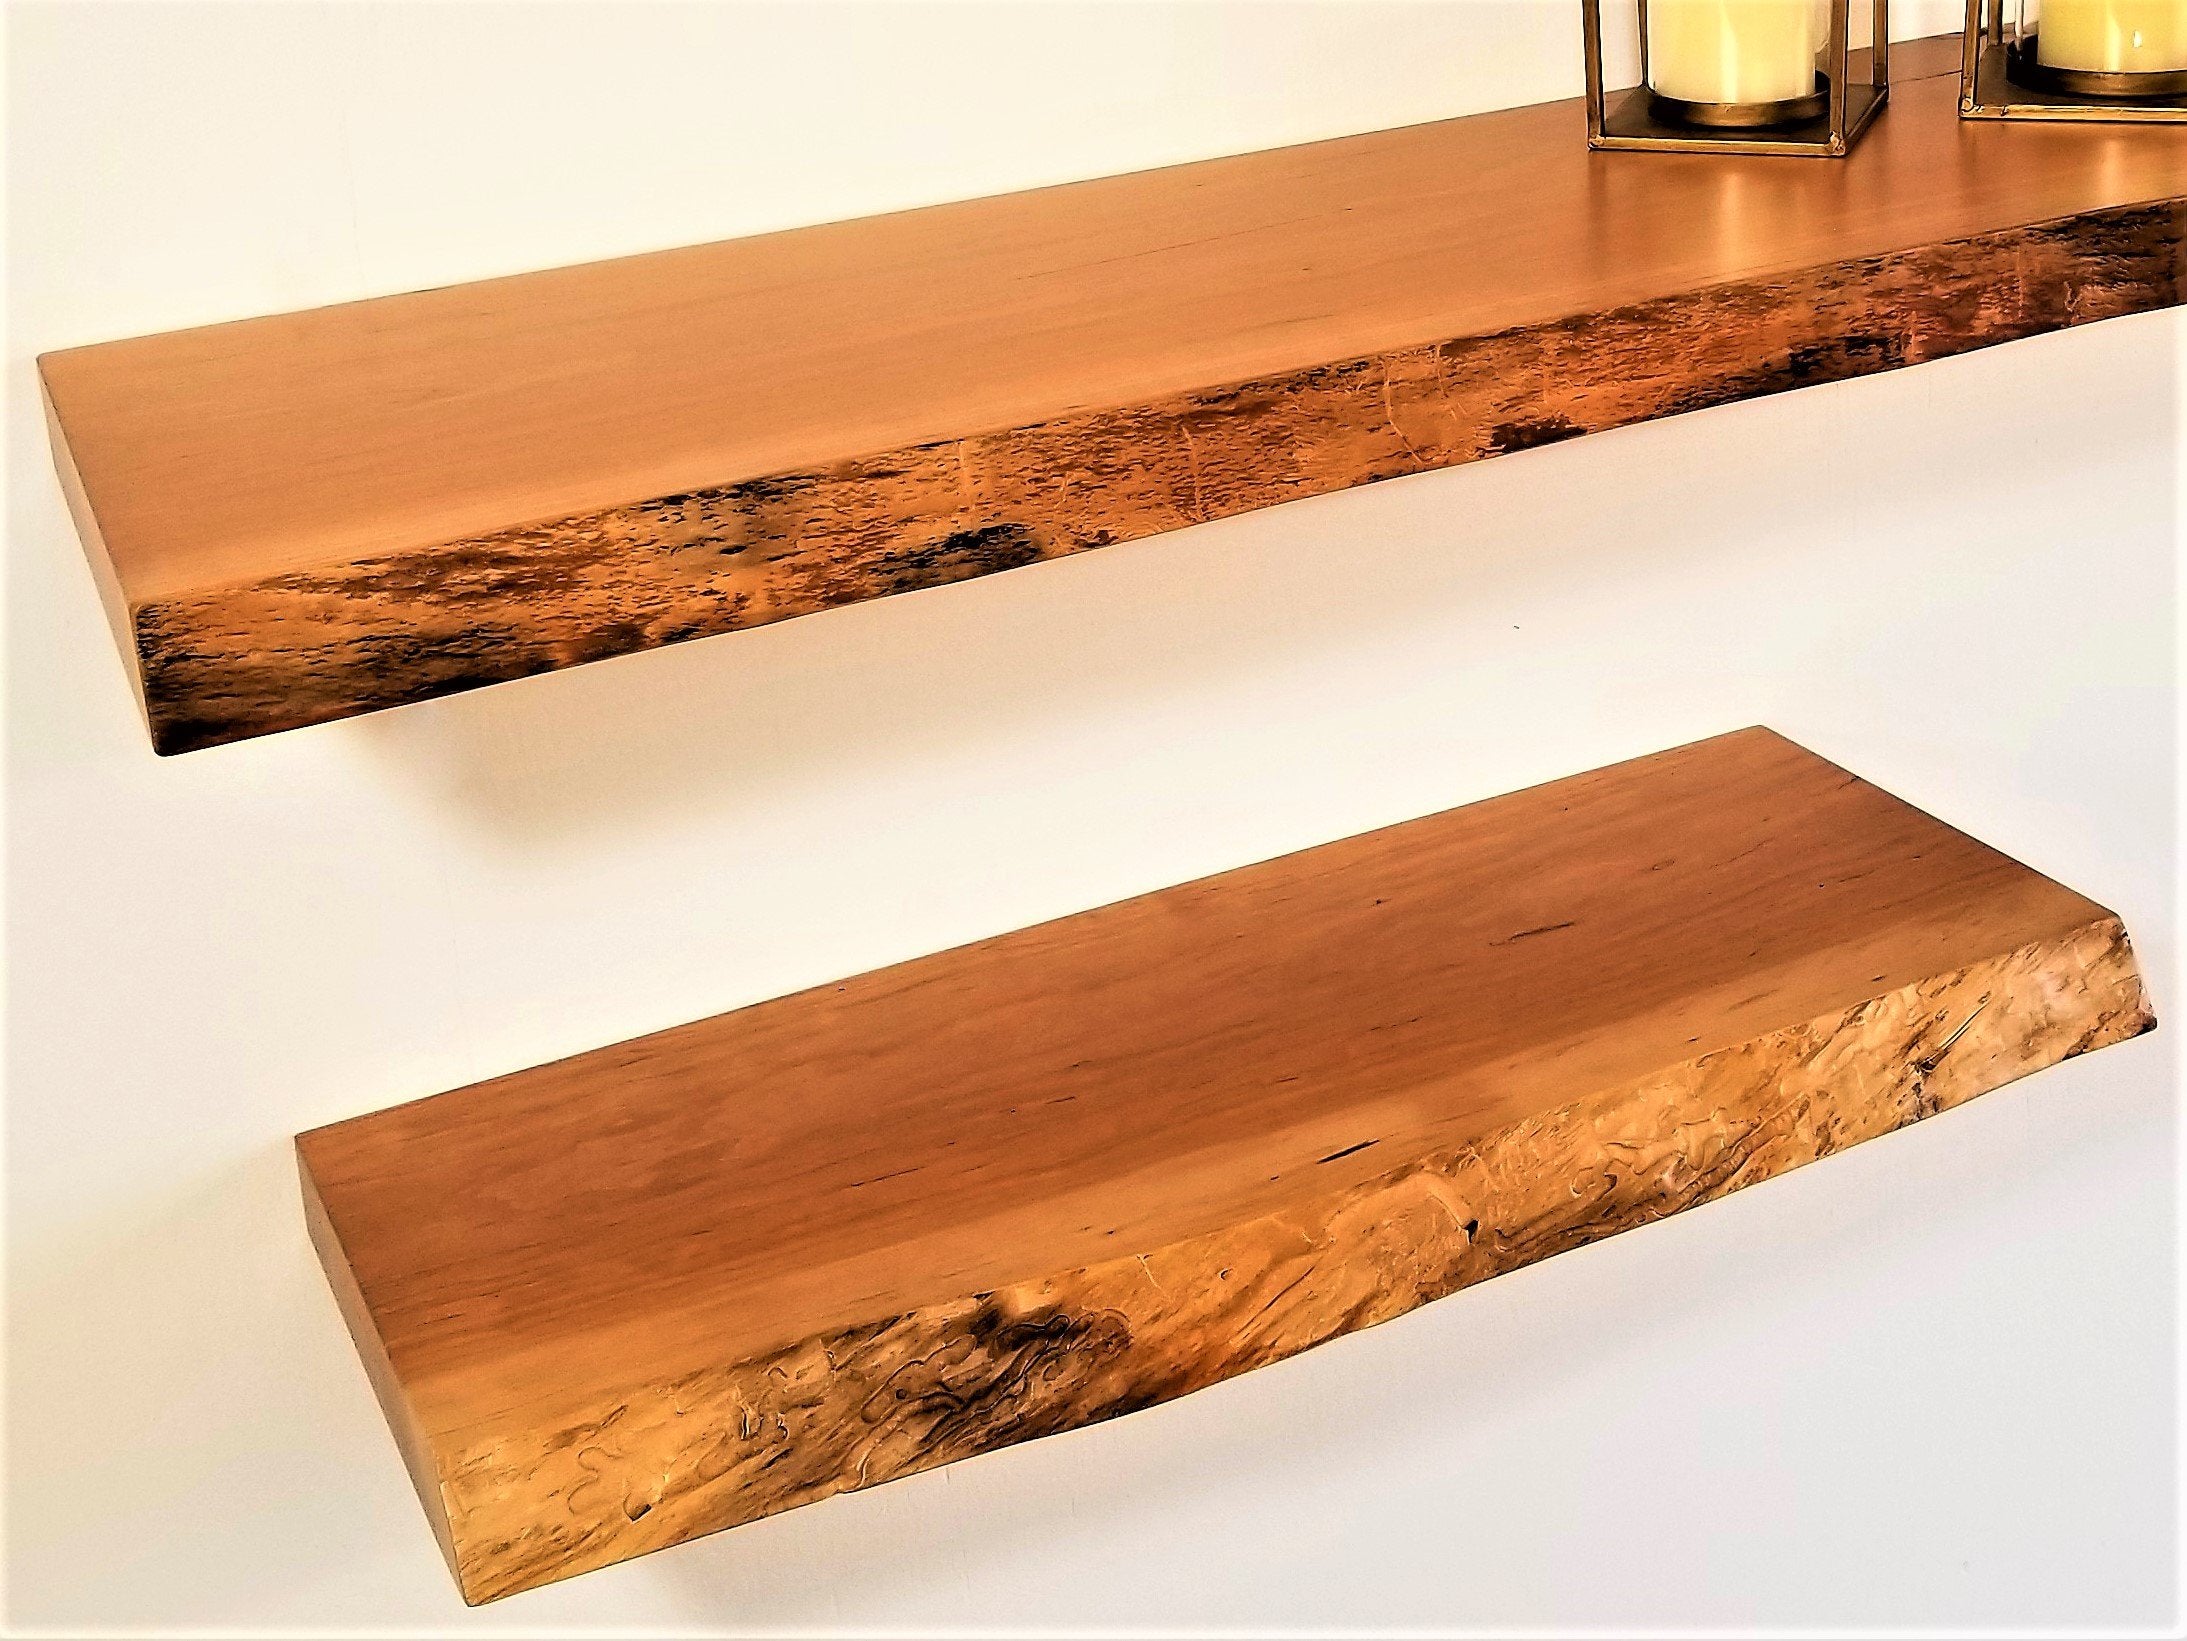 ZimBOARDS Solid Solid Wild Cherry Live-Edge Floating Shelves